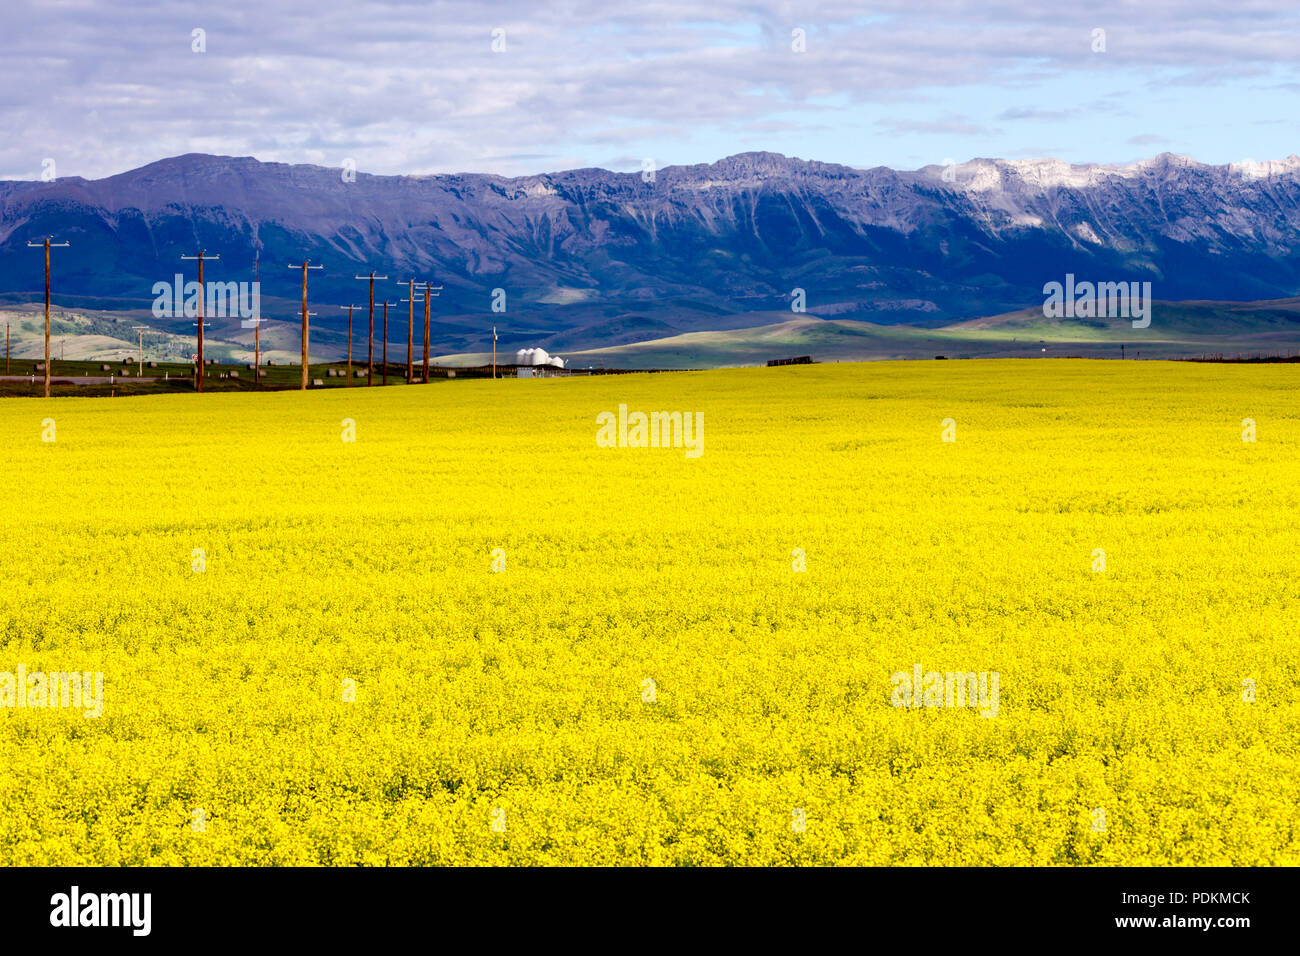 View of a canola field with the Canadian Rockies in the background near Pincher Creek, Alberta, Canada. Stock Photo